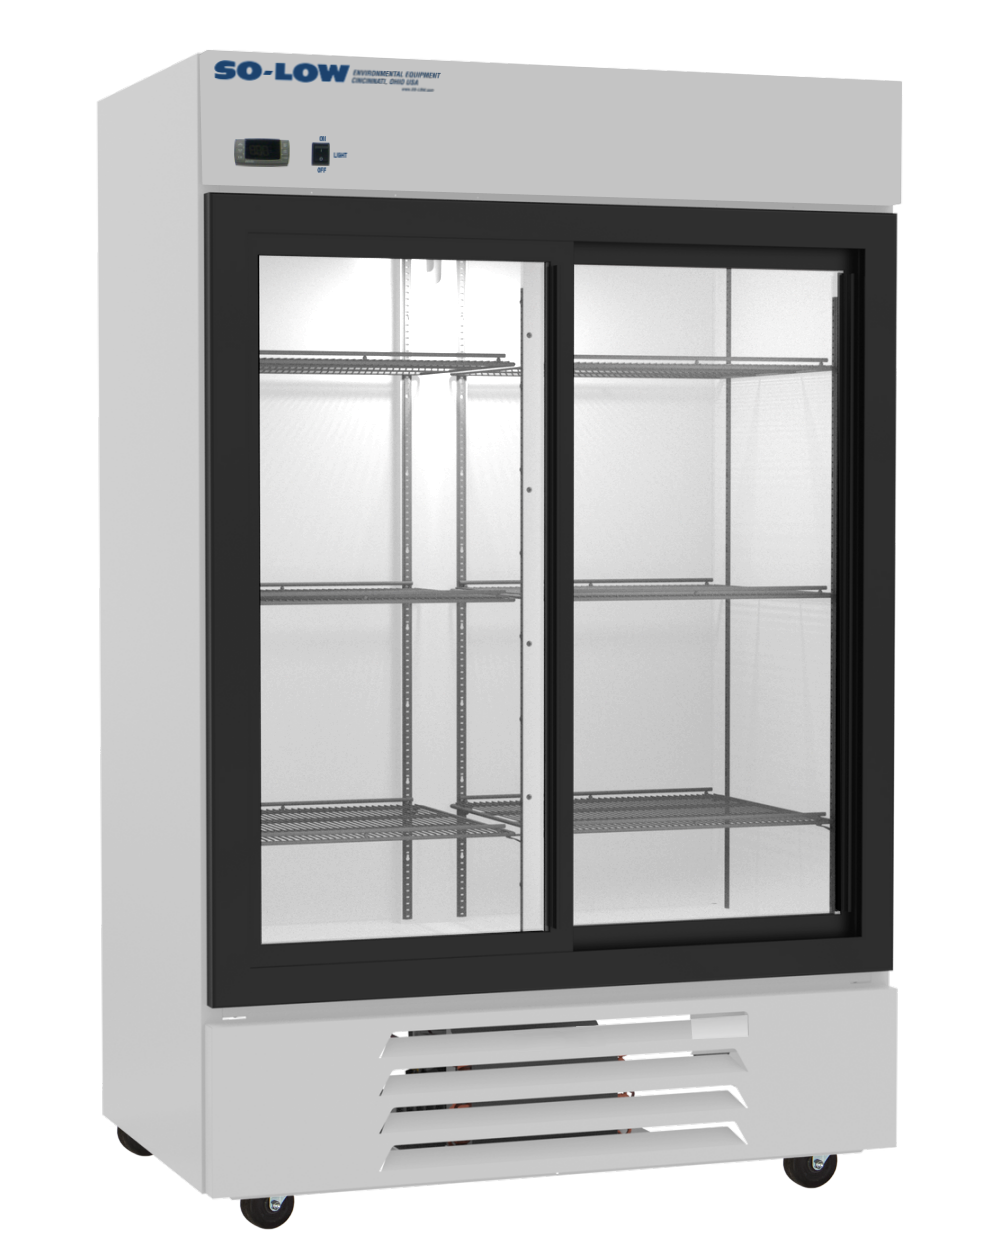 So-Low 2ºC to 8ºC, 45.4 cu. ft., two glass doors, Cycle defrost, 115v